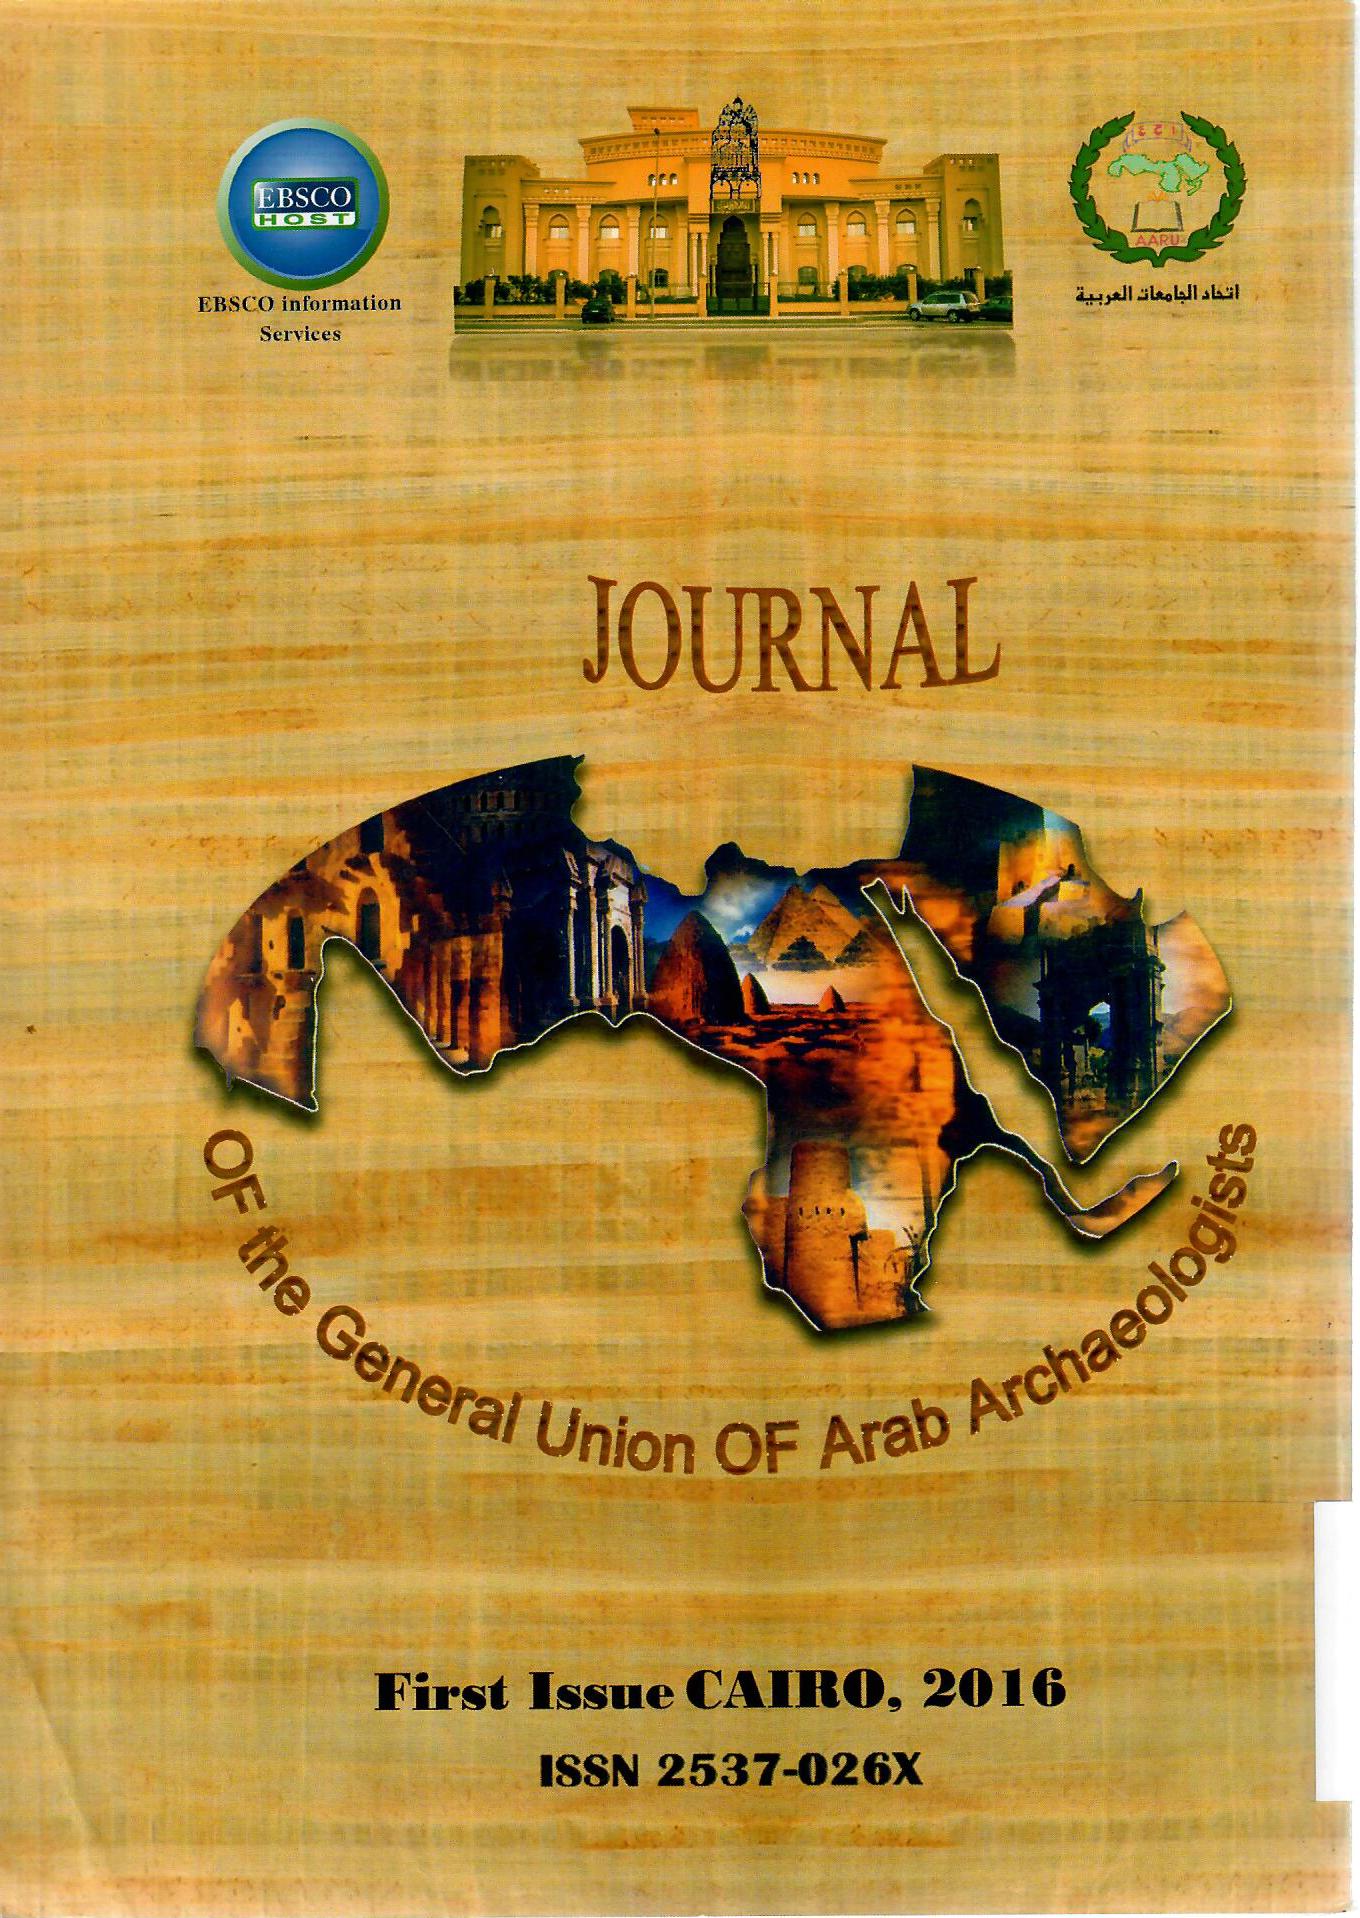 JOURNAL FIRST ISSUE